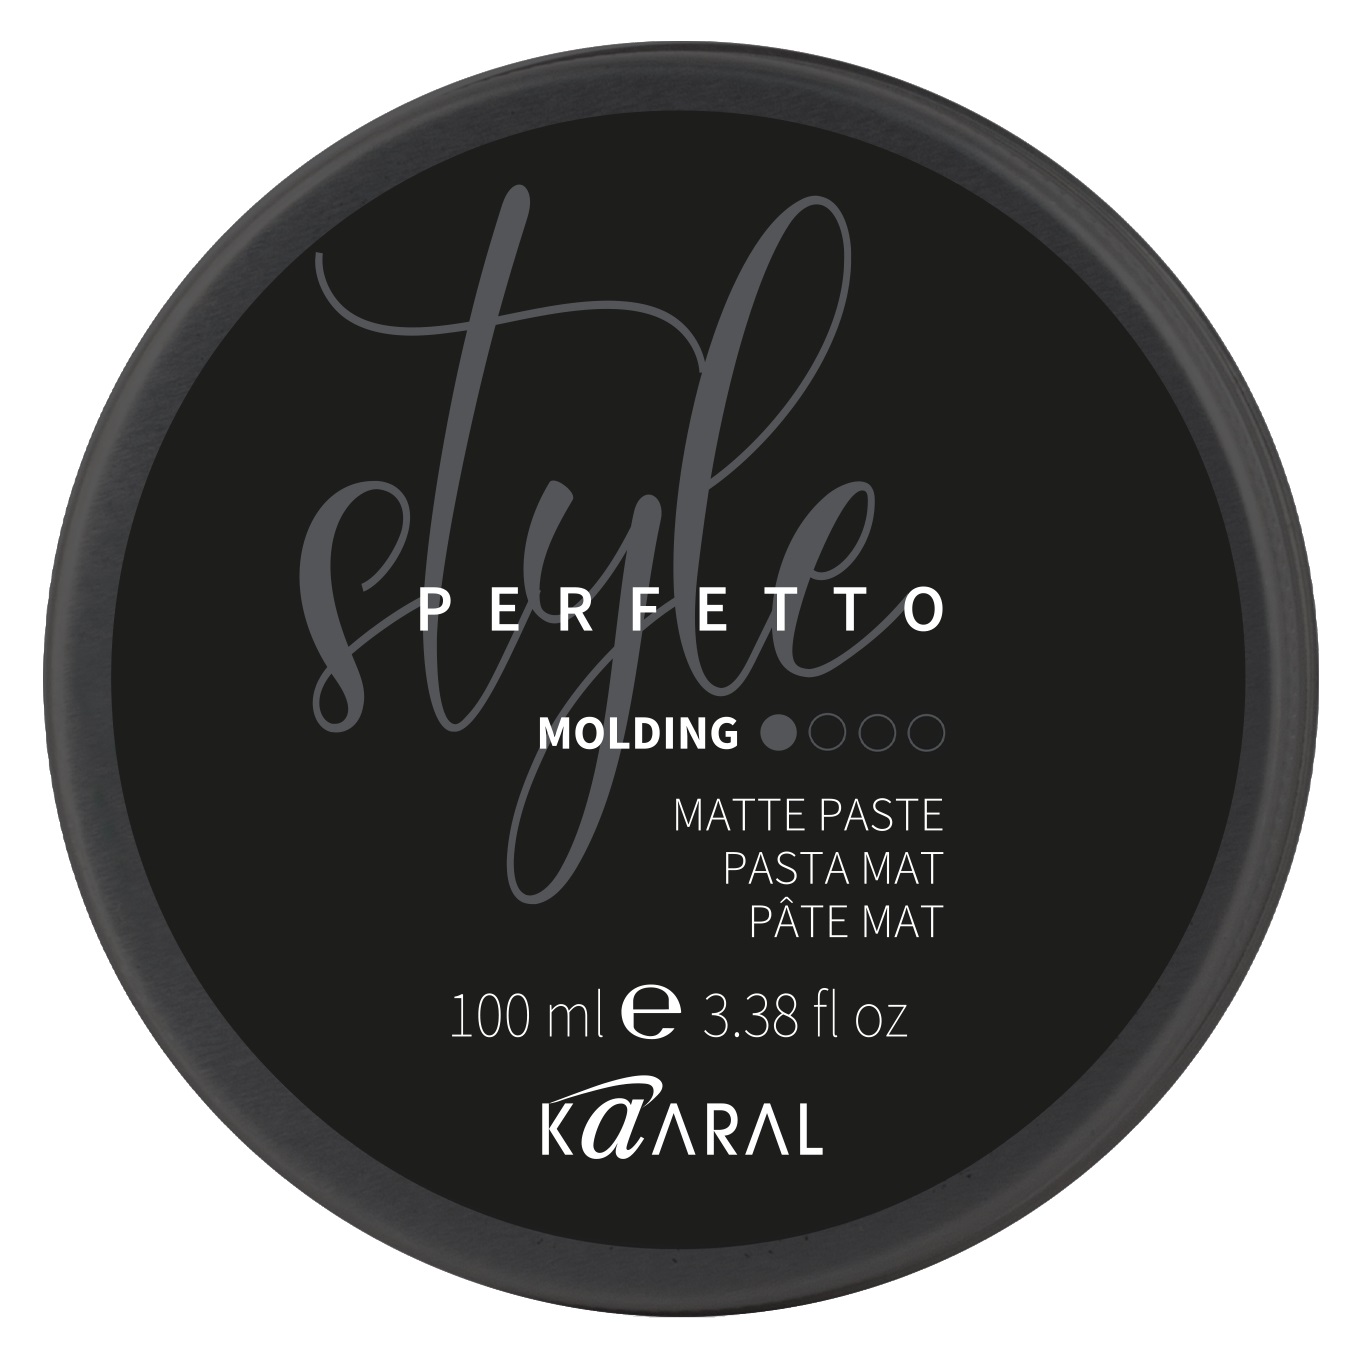 матовая паста kaaral style perfetto molding matte paste 80 мл Kaaral Матовая паста Molding Matte Paste, 100 мл (Kaaral, Style Perfetto)